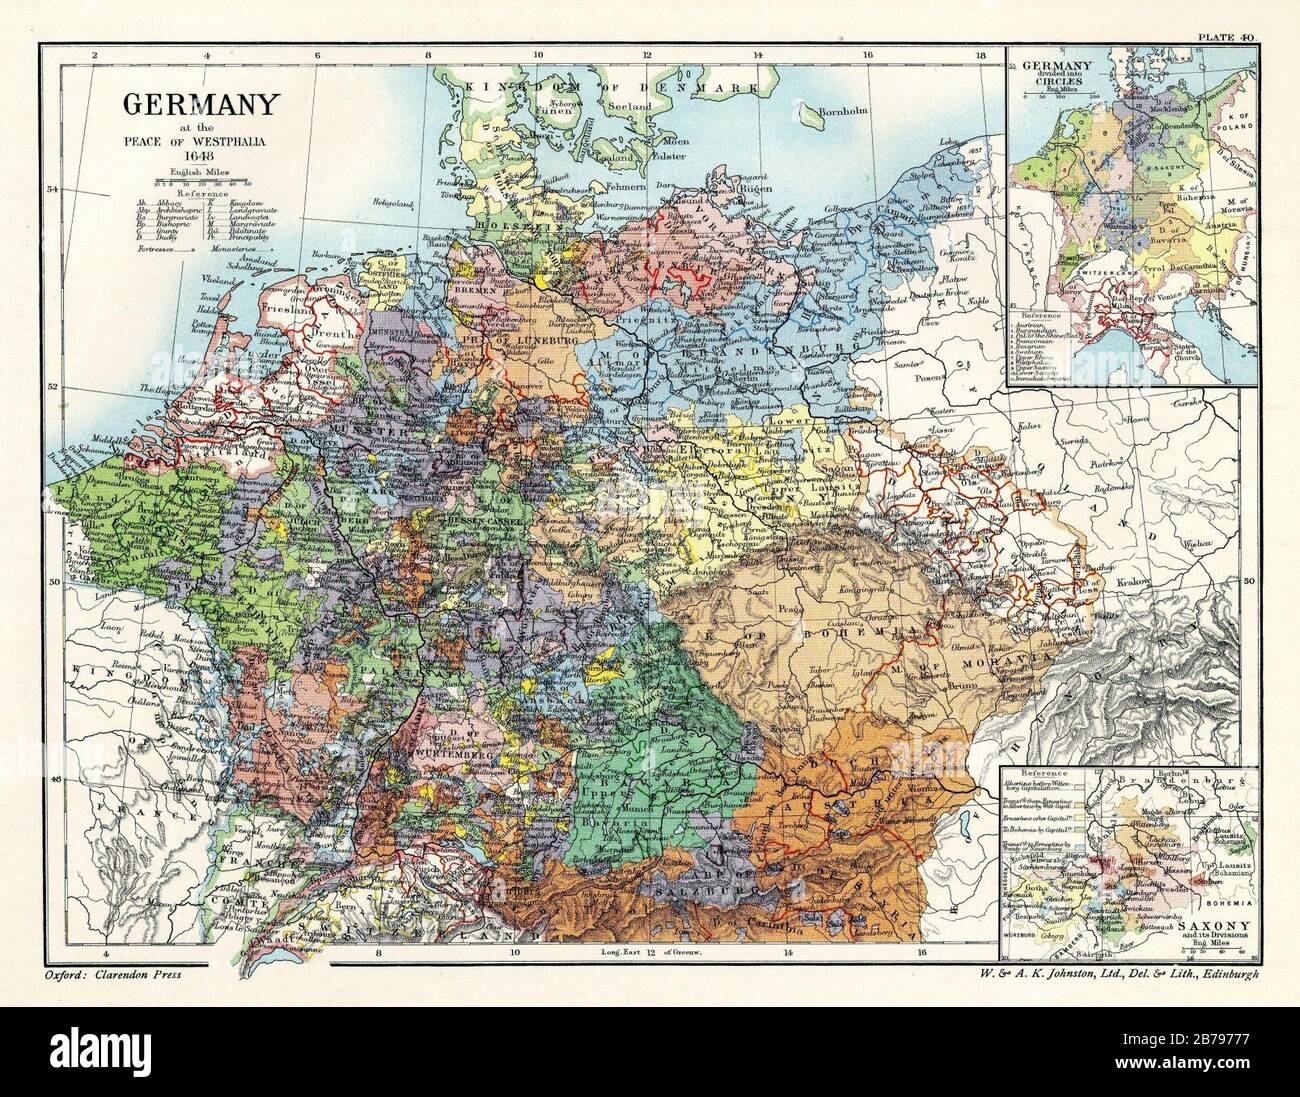 Germany at the Peace of Westphalia (1648). Stock Photo